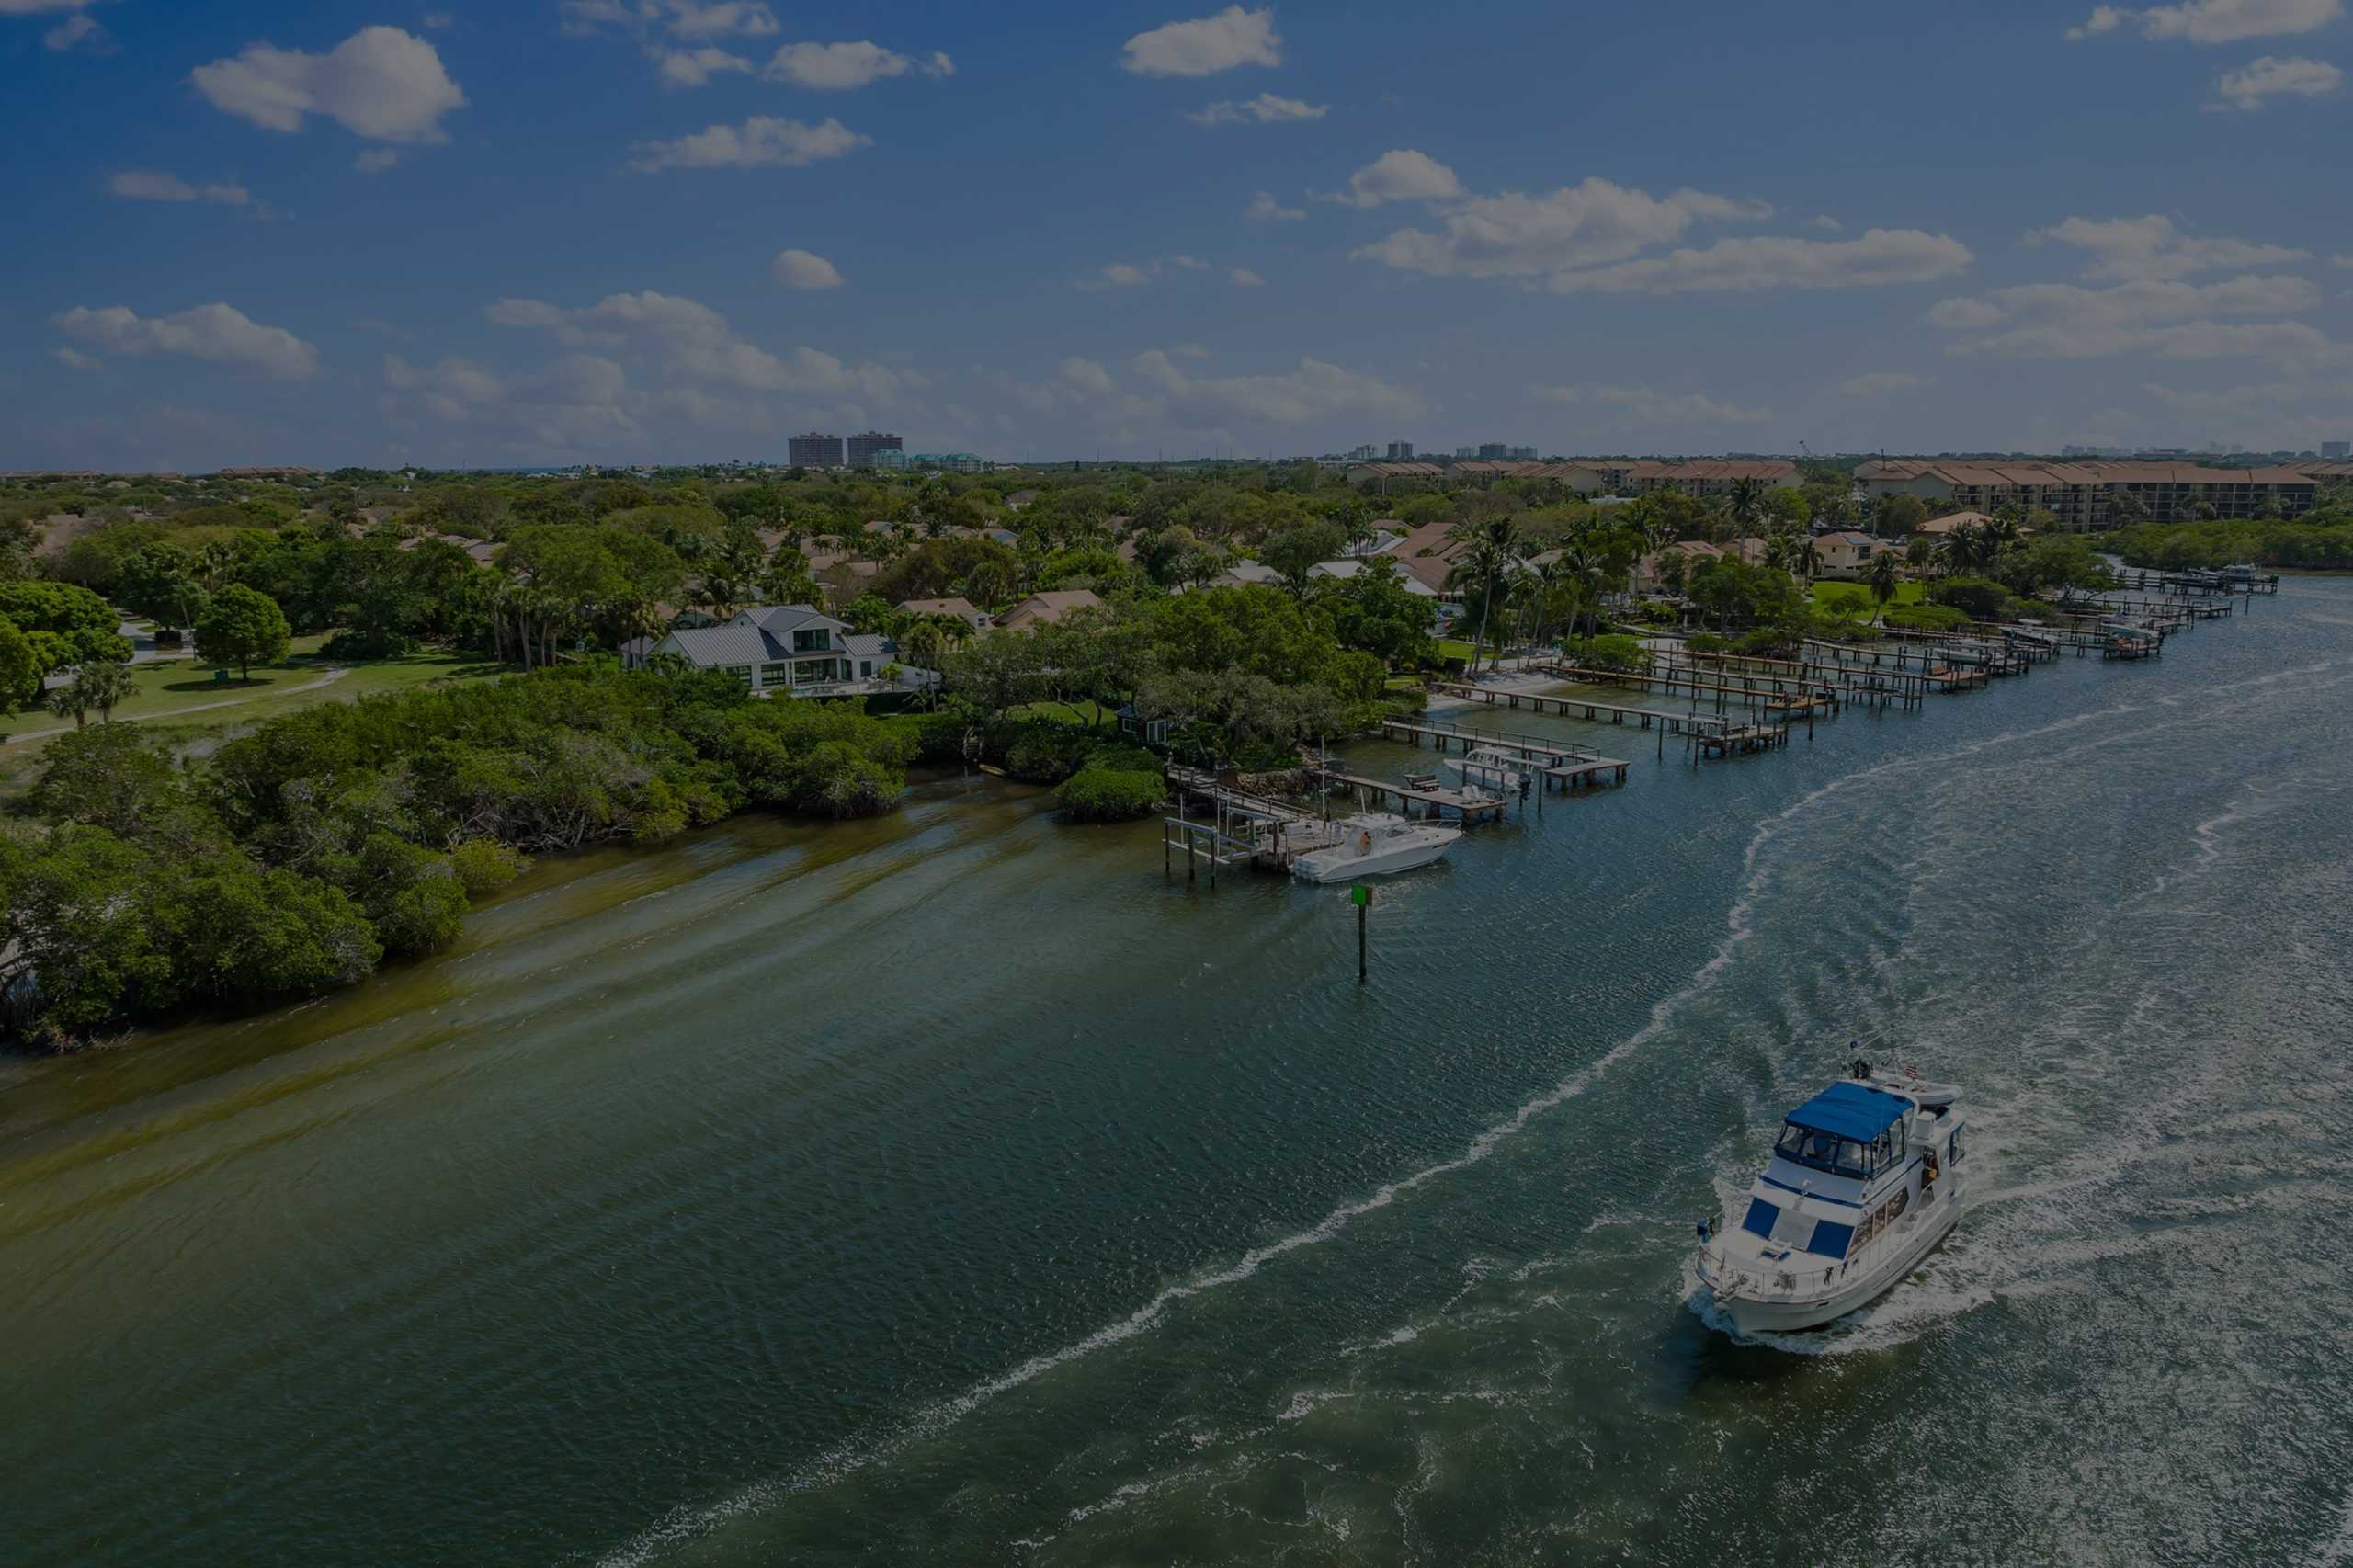 SOLD! Gorgeous Intracoastal home in the Bluffs $4,325,000